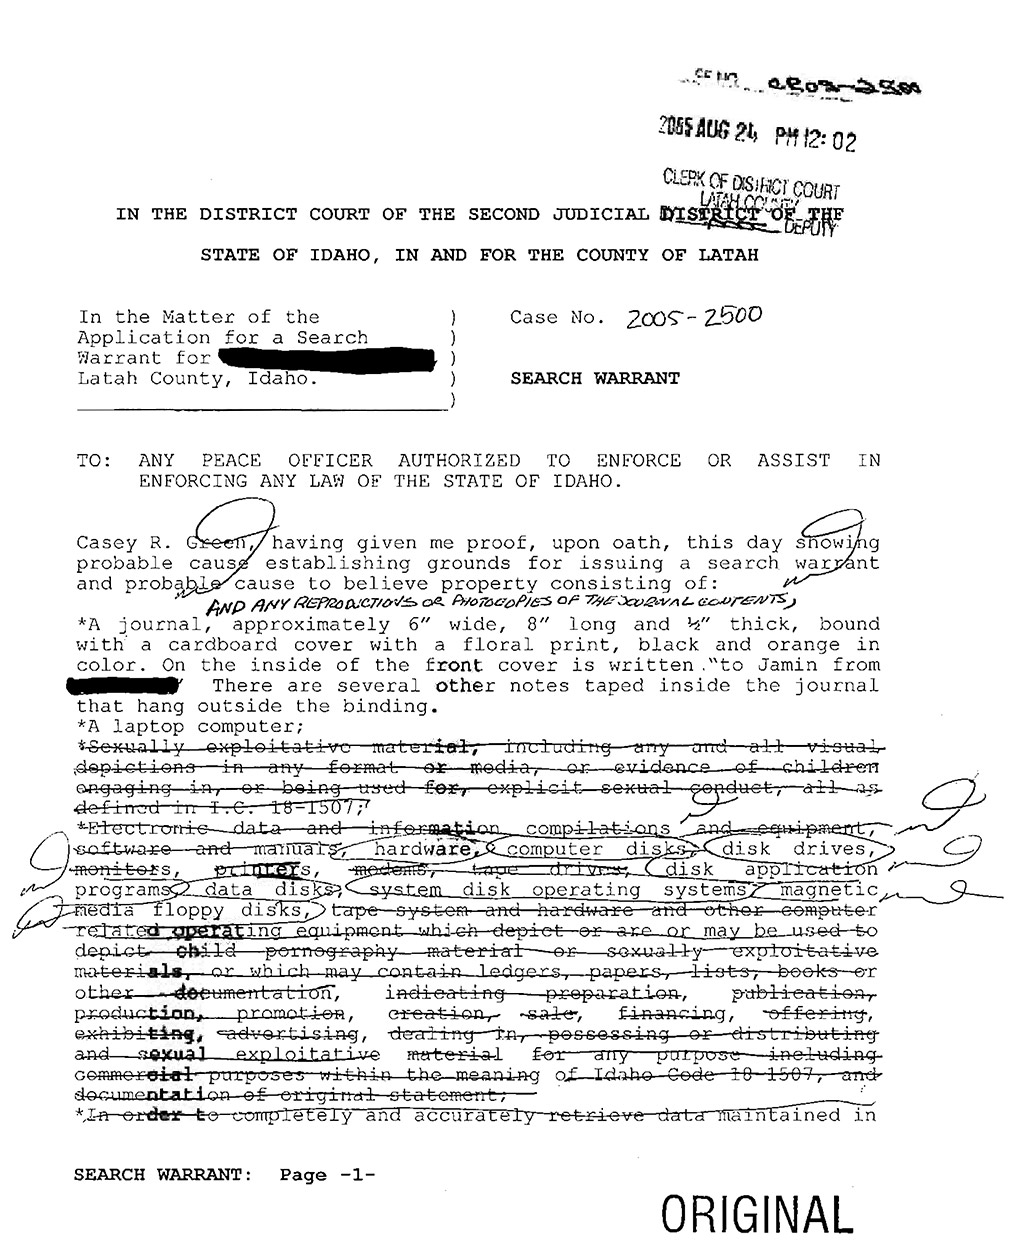 Jamin Wight Search Warrant page 1